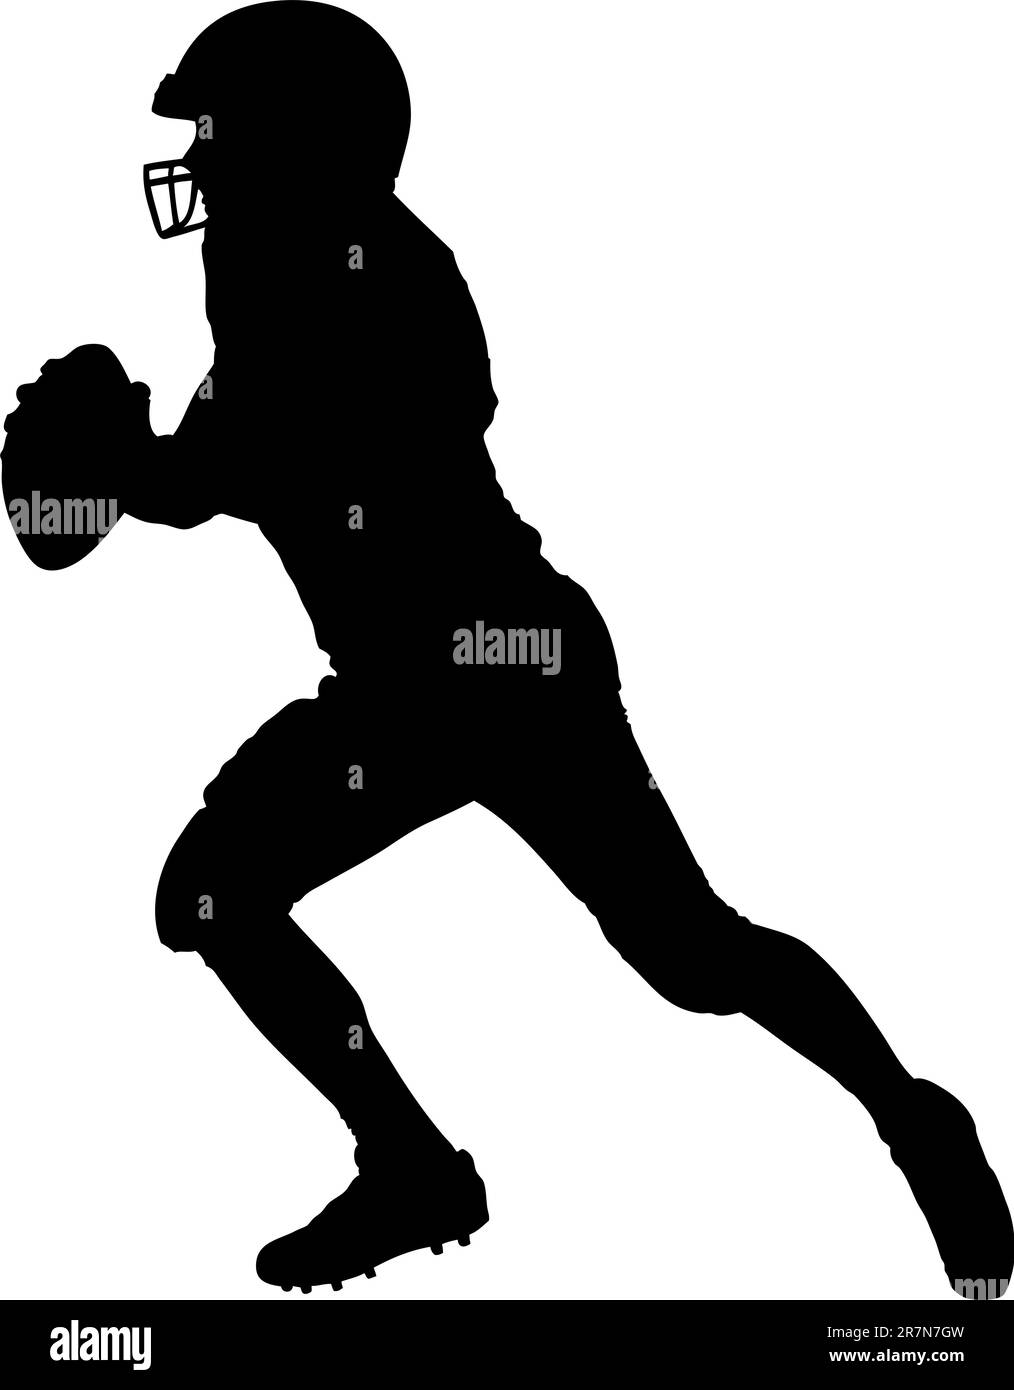 american football player holding the ball Stock Vector